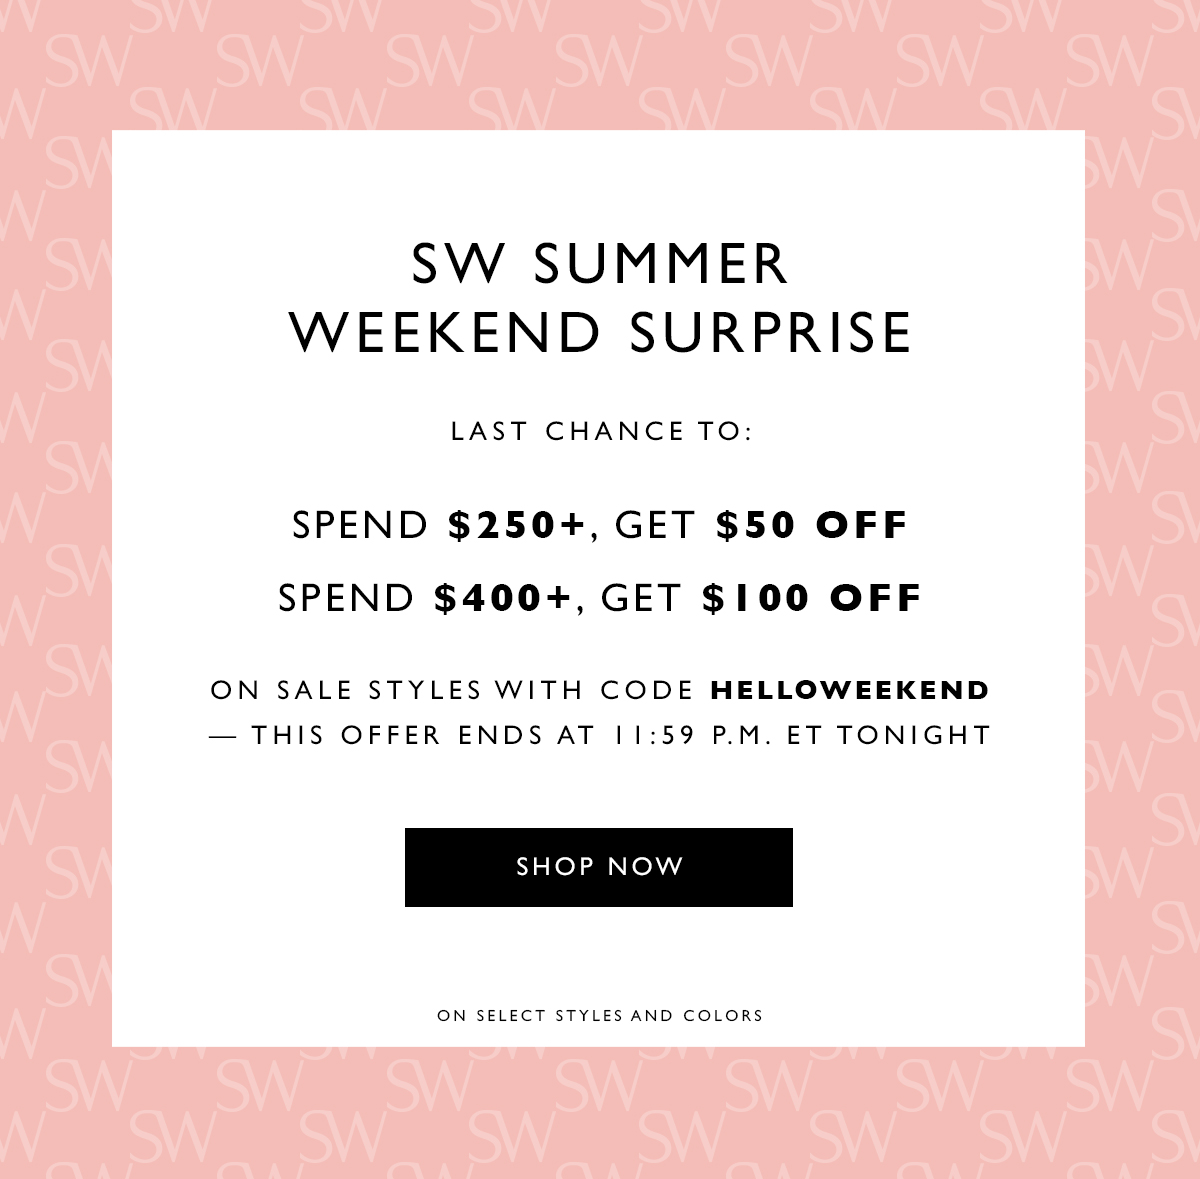 SW Summer Weekend Surprise. Last chance to: Spend $250+, get $50 off Spend $400+, get $100 off on sale styles with code HELLOWEEKEND — this offer ends at 11:59 P.M. ET tonight. SHOP NOW. On select styles and colors